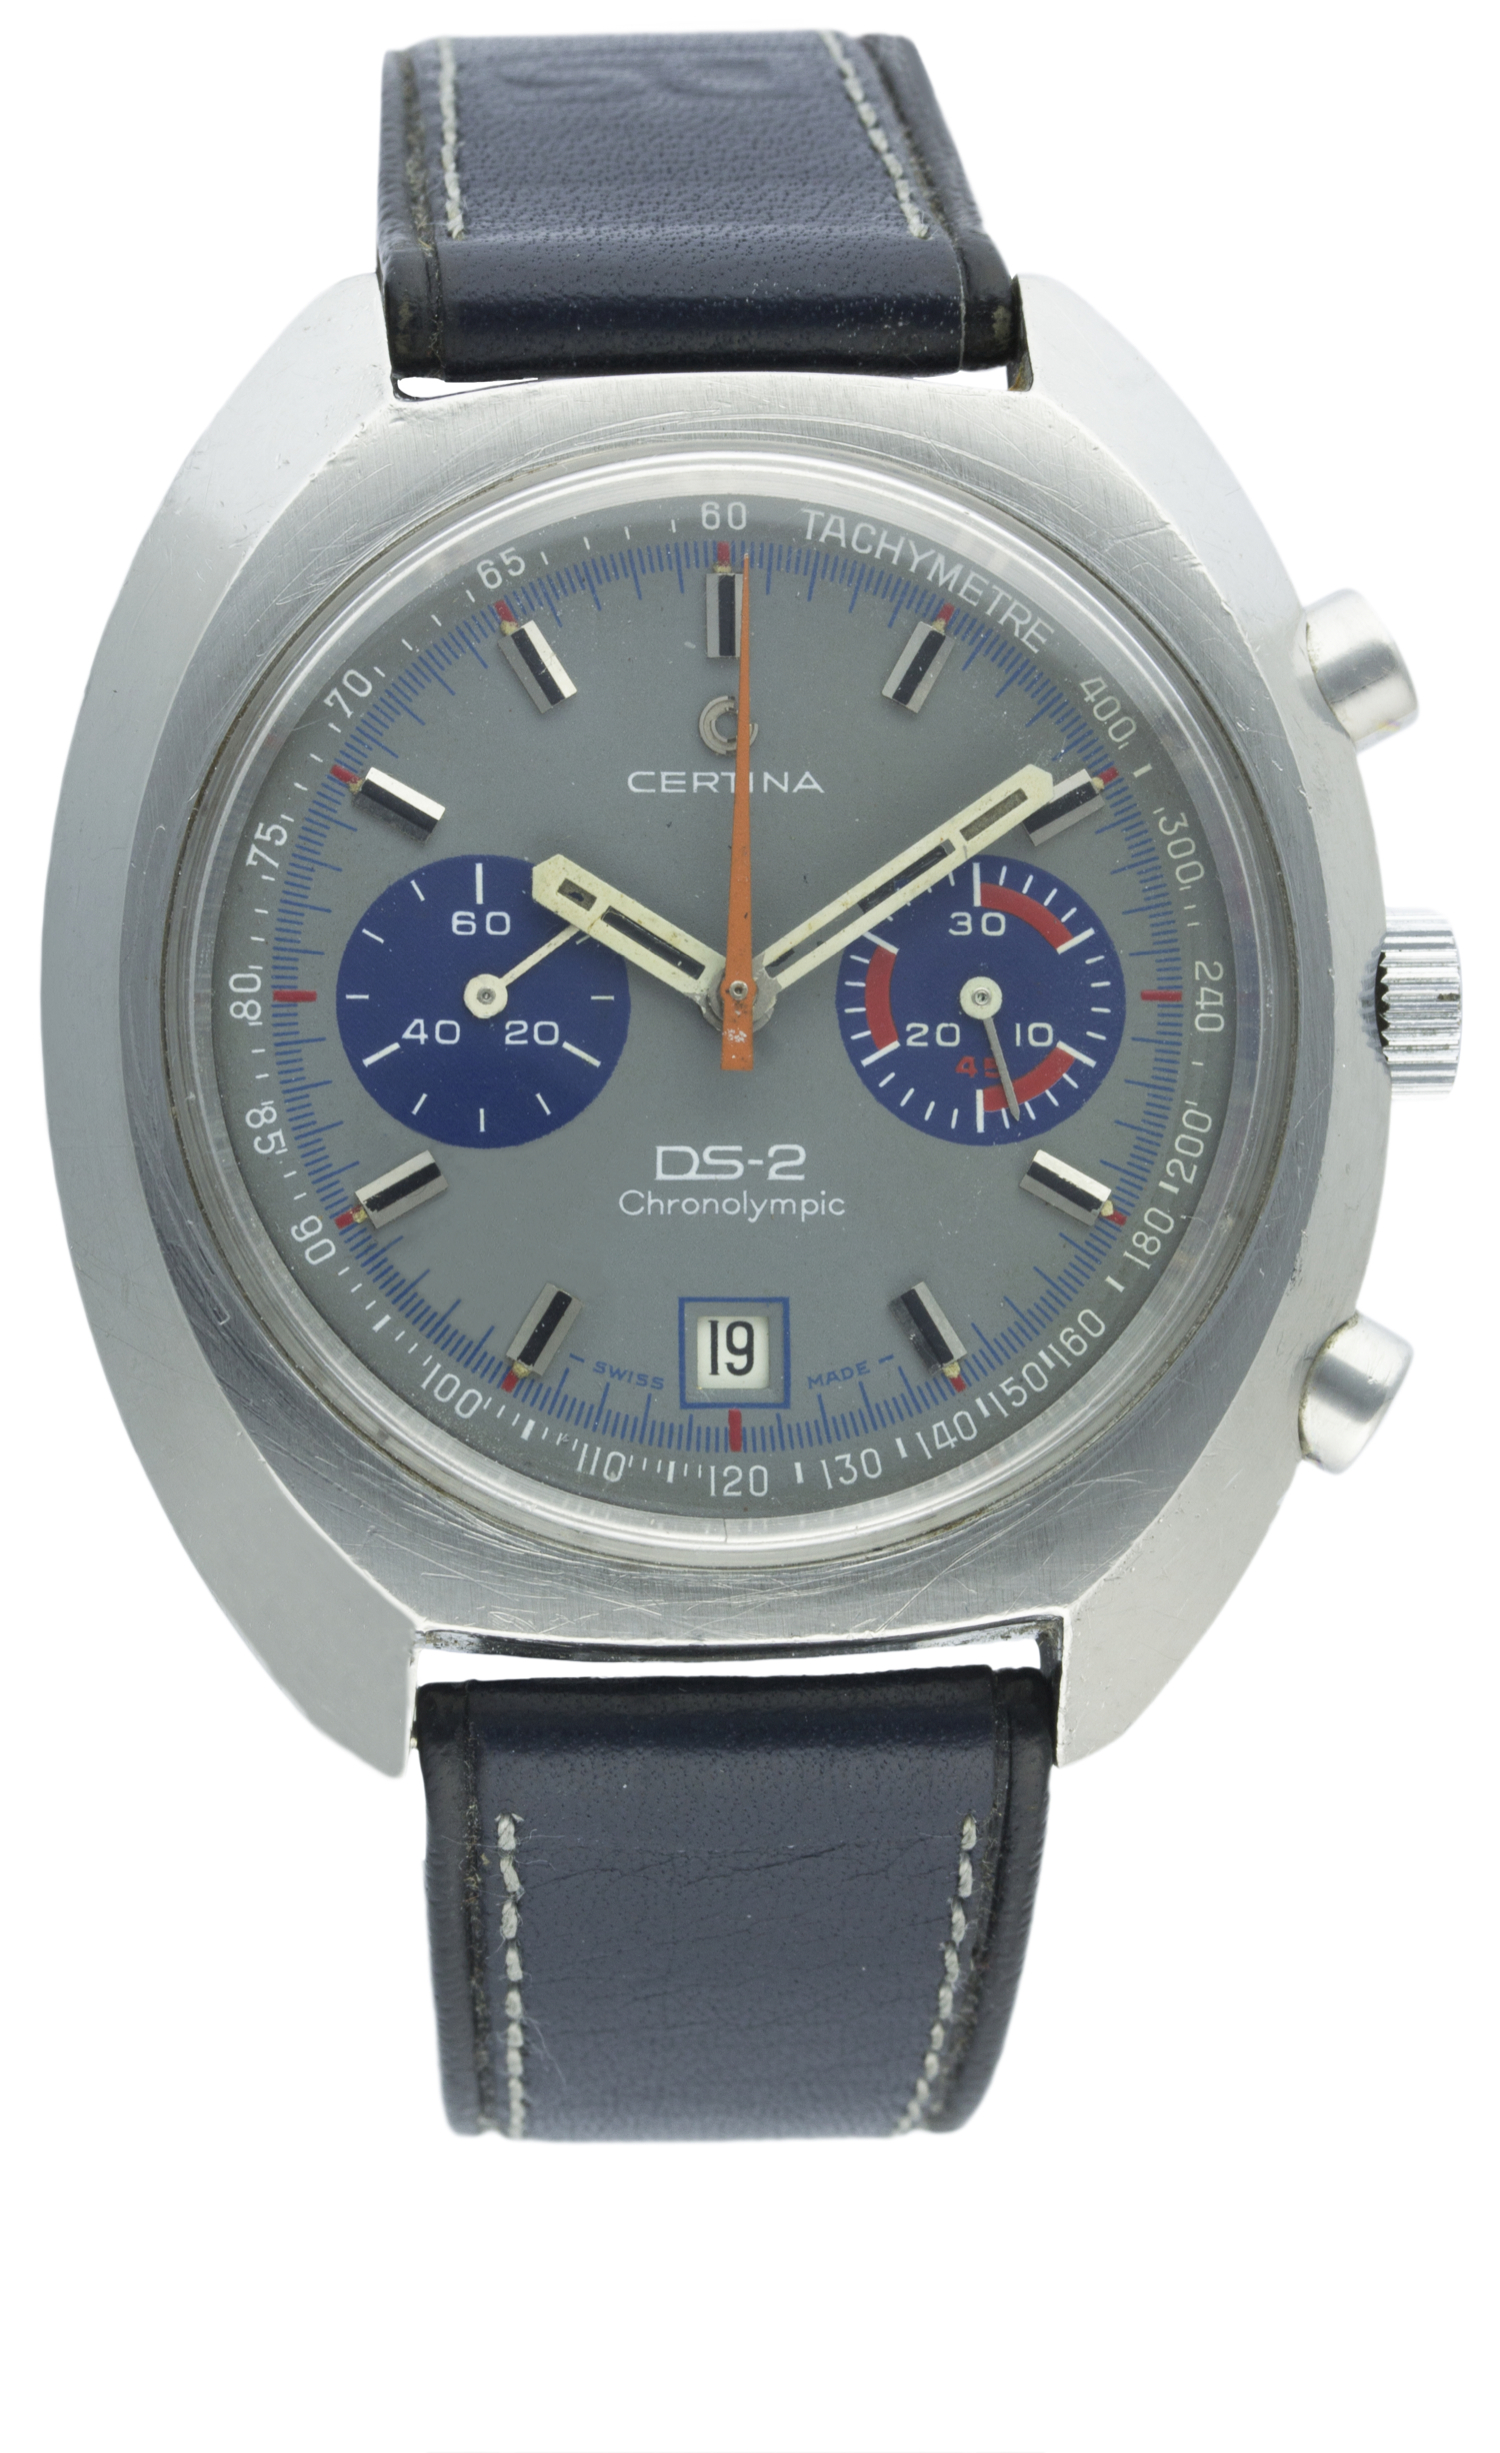 A RARE GENTLEMAN'S STAINLESS STEEL CERTINA CHRONOLYMPIC DS-2 CHRONOGRAPH WRIST WATCH CIRCA 1972 D: - Image 2 of 2